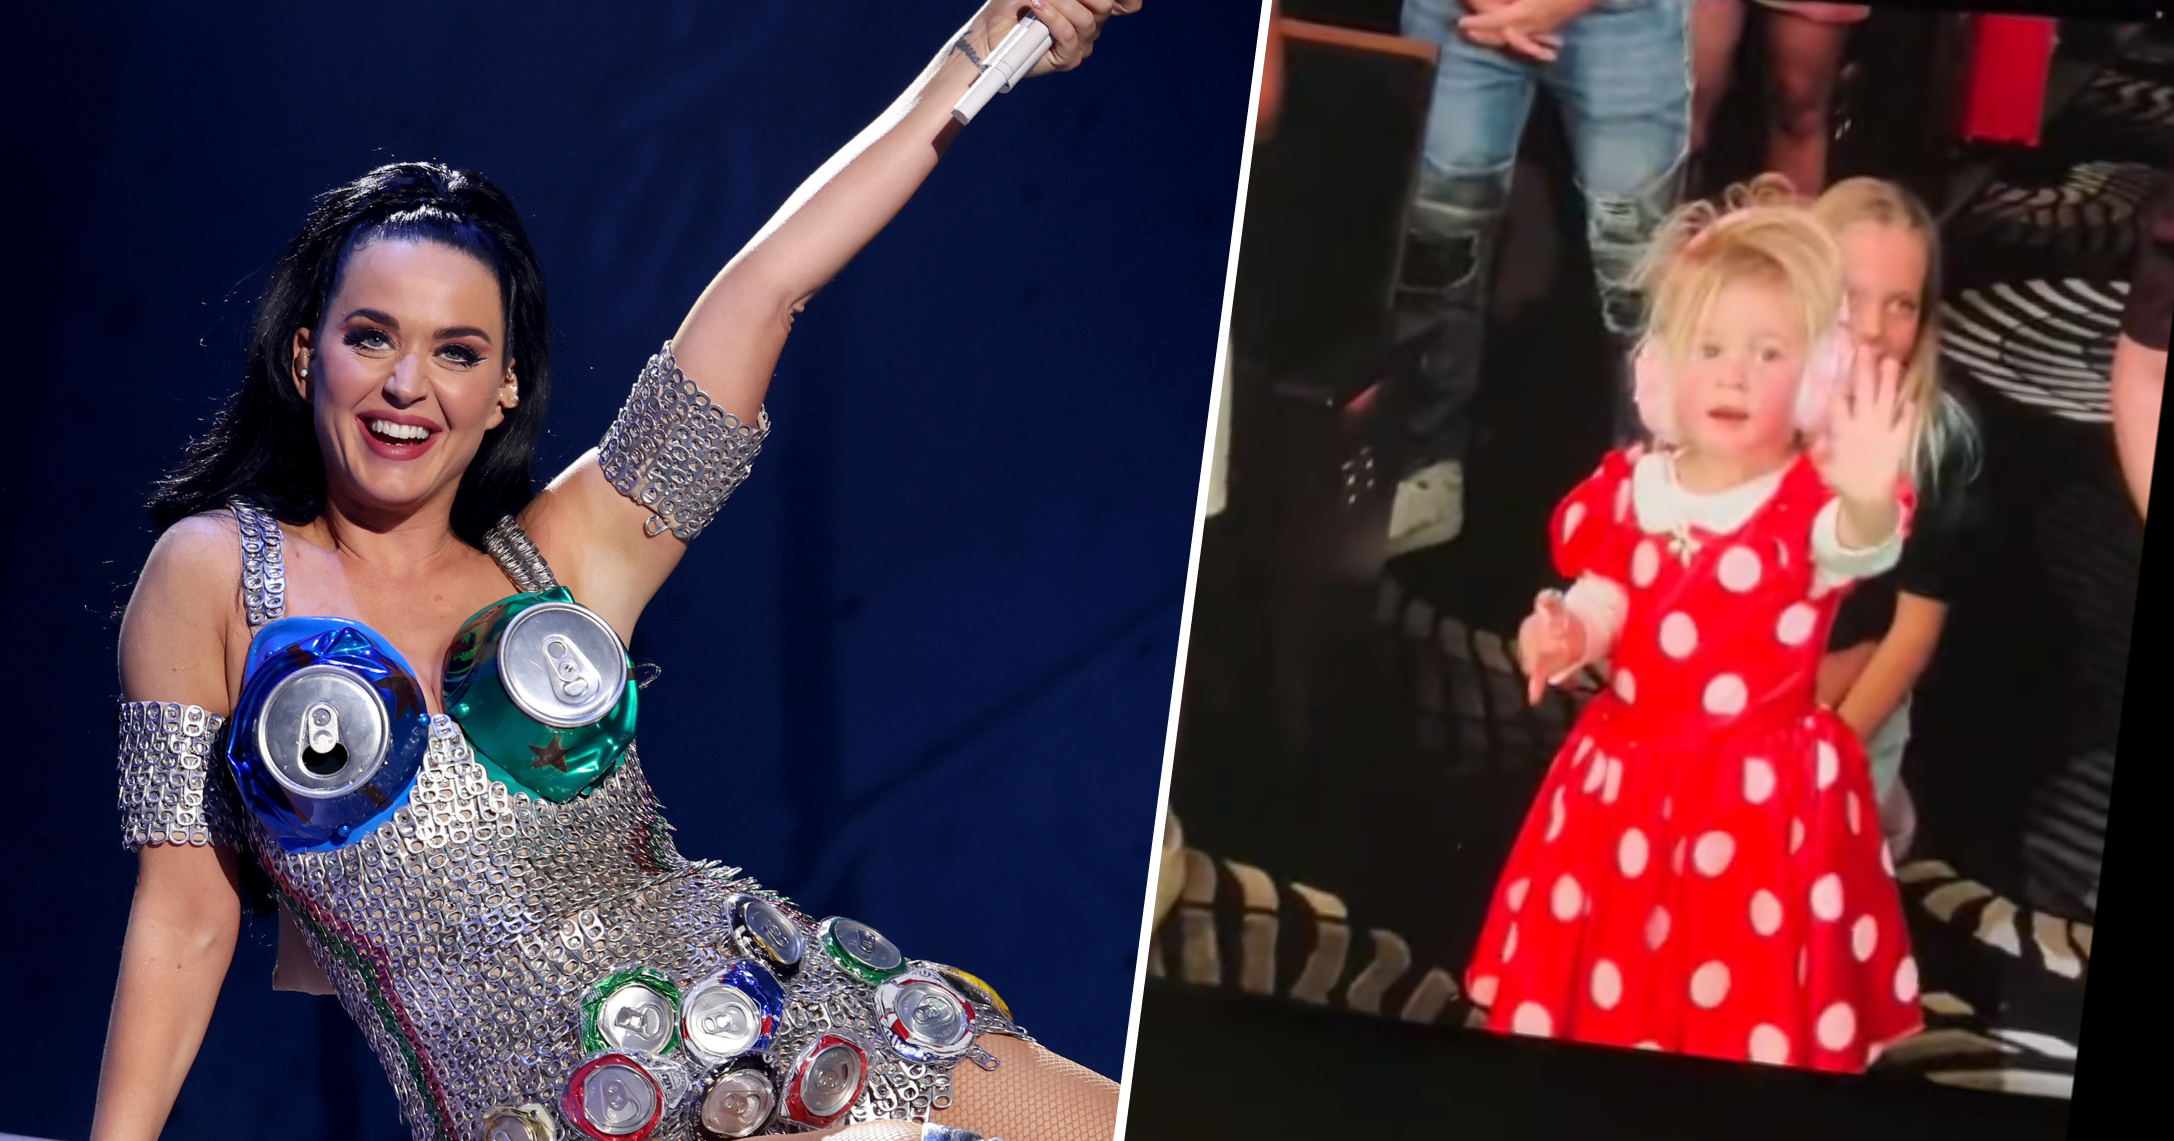 Katy Perry Daughter First Public Outing at Las Vegas Residency Finale